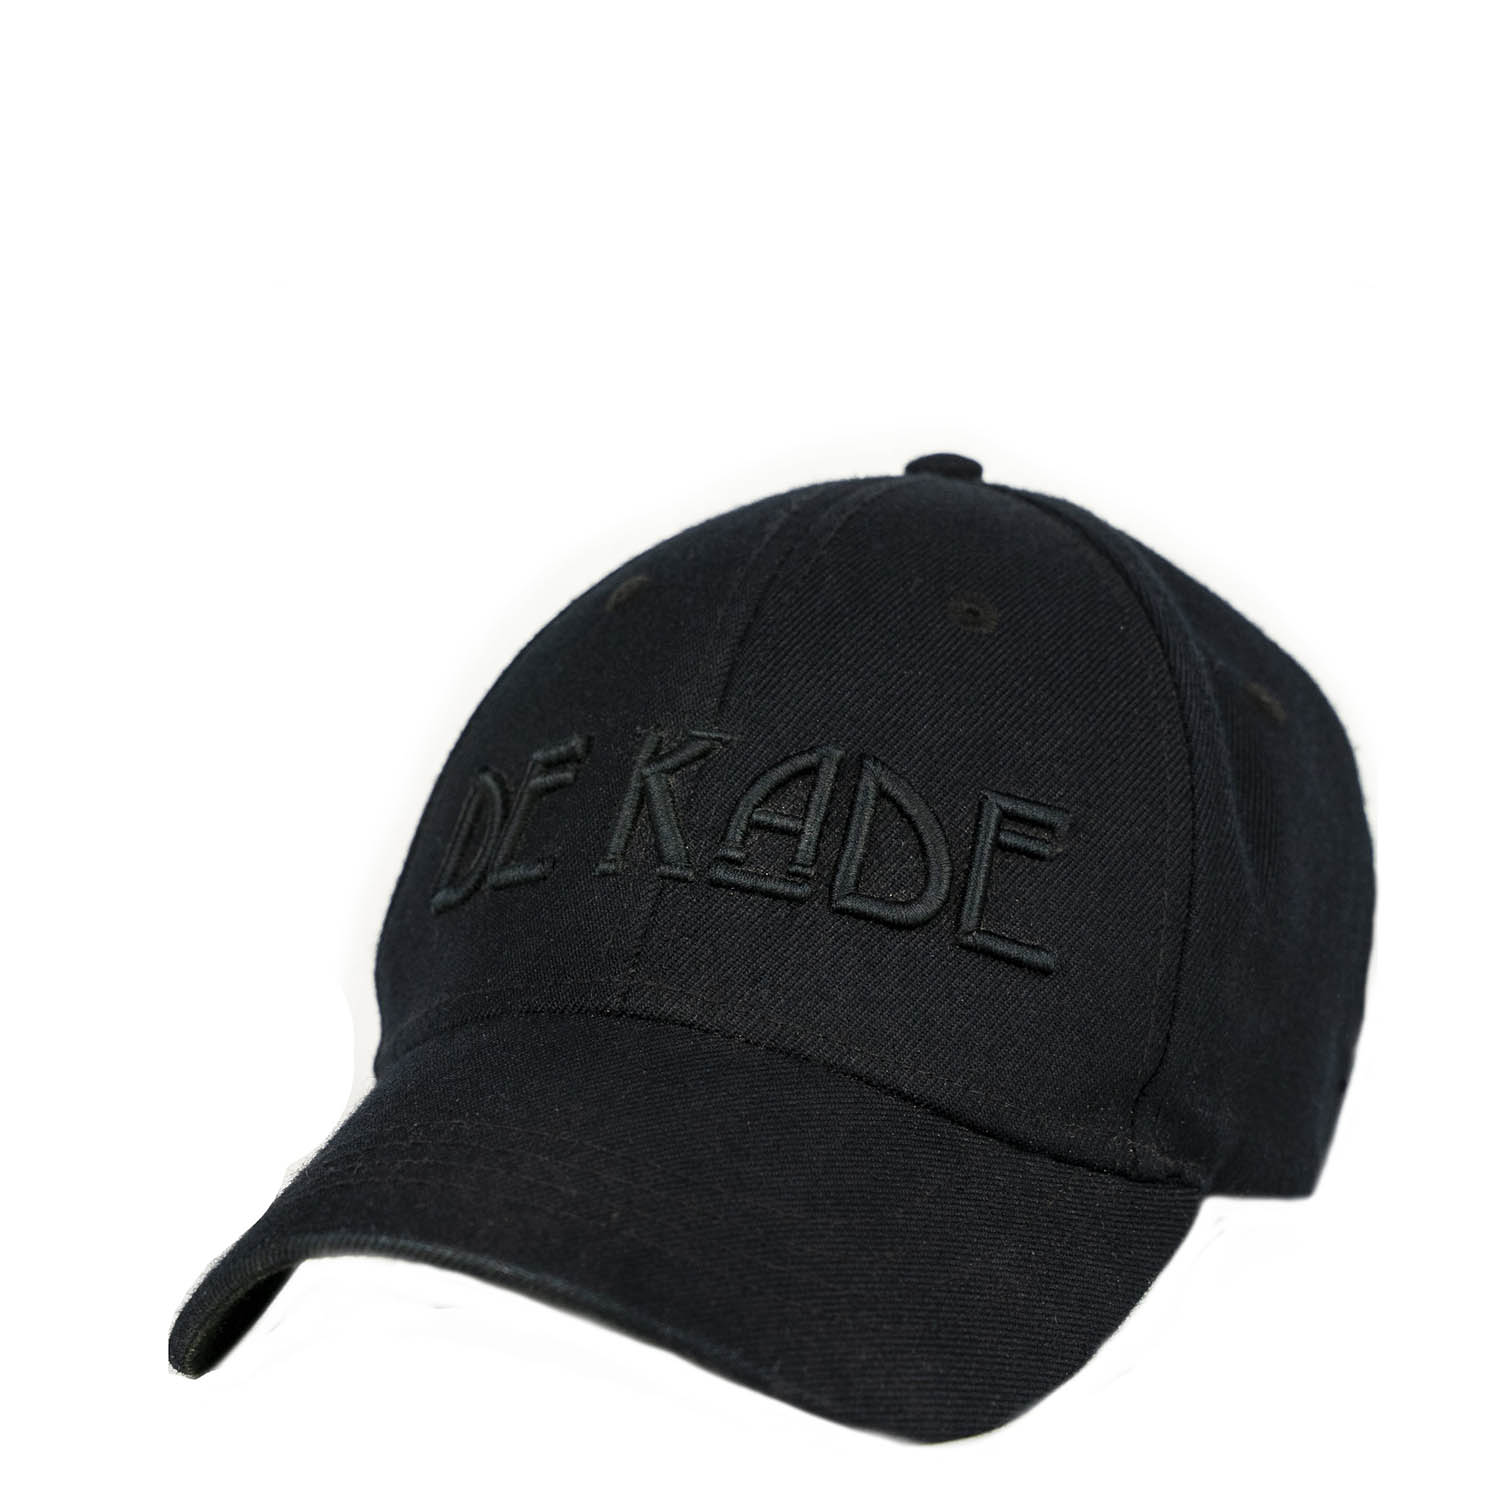 Yankee Cap - All black first image